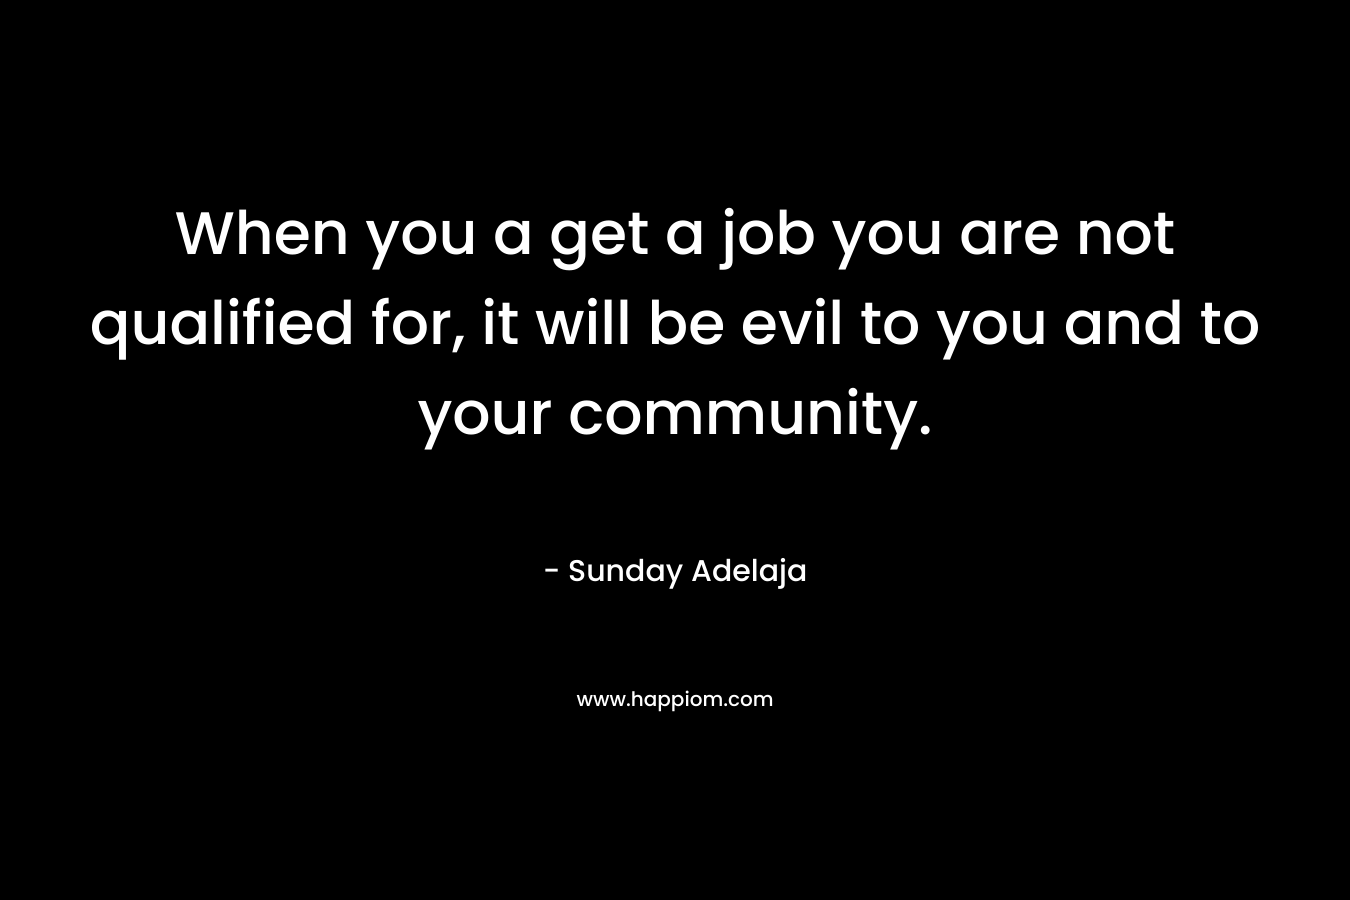 When you a get a job you are not qualified for, it will be evil to you and to your community.